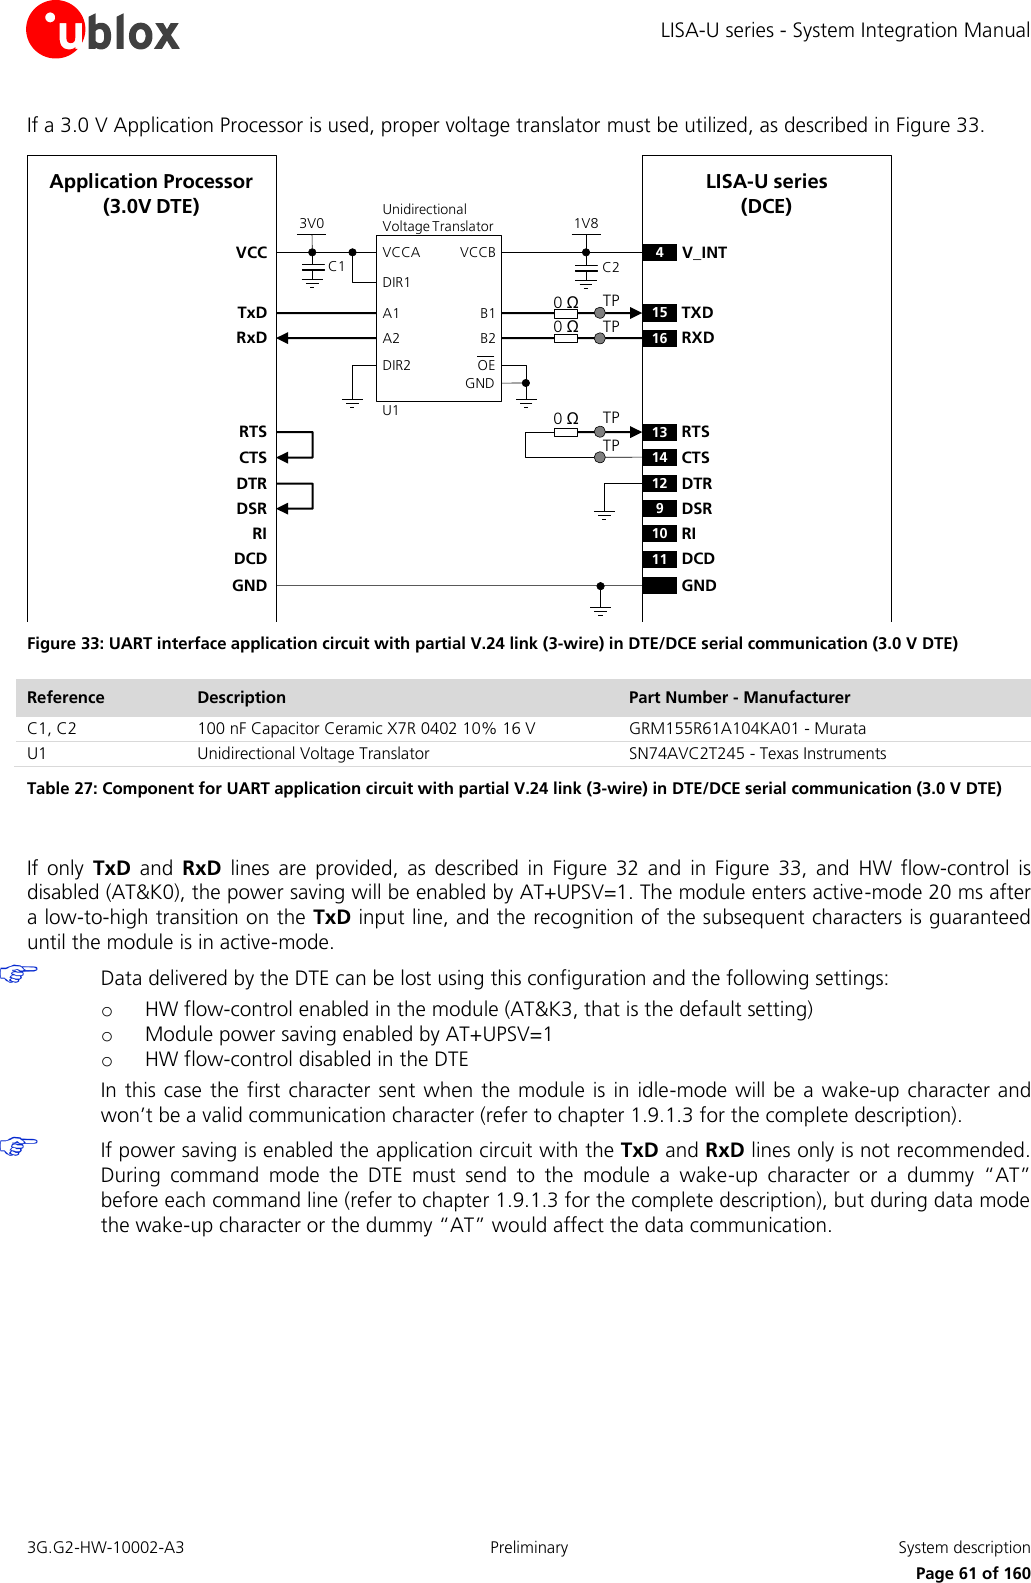 LISA-U series - System Integration Manual 3G.G2-HW-10002-A3  Preliminary  System description      Page 61 of 160 If a 3.0 V Application Processor is used, proper voltage translator must be utilized, as described in Figure 33. 4V_INTTxDApplication Processor(3.0V DTE)RxDDTRDSRRIDCDGNDLISA-U series (DCE)15 TXD12 DTR16 RXD9DSR10 RI11 DCDGND0 Ω0 ΩTPTP1V8B1 A1GNDU1VCCBVCCAUnidirectionalVoltage TranslatorC1 C23V0DIR1DIR2 OEVCCB2 A2RTSCTS13 RTS14 CTS0 ΩTPTP Figure 33: UART interface application circuit with partial V.24 link (3-wire) in DTE/DCE serial communication (3.0 V DTE) Reference Description Part Number - Manufacturer C1, C2 100 nF Capacitor Ceramic X7R 0402 10% 16 V GRM155R61A104KA01 - Murata U1 Unidirectional Voltage Translator SN74AVC2T245 - Texas Instruments Table 27: Component for UART application circuit with partial V.24 link (3-wire) in DTE/DCE serial communication (3.0 V DTE)  If  only  TxD  and  RxD  lines  are  provided,  as  described  in  Figure  32  and  in  Figure  33,  and  HW  flow-control  is disabled (AT&amp;K0), the power saving will be enabled by AT+UPSV=1. The module enters active-mode 20 ms after a low-to-high transition on the TxD input line, and the recognition of the subsequent characters is guaranteed until the module is in active-mode.  Data delivered by the DTE can be lost using this configuration and the following settings: o HW flow-control enabled in the module (AT&amp;K3, that is the default setting) o Module power saving enabled by AT+UPSV=1 o HW flow-control disabled in the DTE In this case the first character sent when the  module is  in idle-mode will be a  wake-up character and won’t be a valid communication character (refer to chapter 1.9.1.3 for the complete description).  If power saving is enabled the application circuit with the TxD and RxD lines only is not recommended. During  command  mode  the  DTE  must  send  to  the  module  a  wake-up  character  or  a  dummy  “AT” before each command line (refer to chapter 1.9.1.3 for the complete description), but during data mode the wake-up character or the dummy “AT” would affect the data communication.  